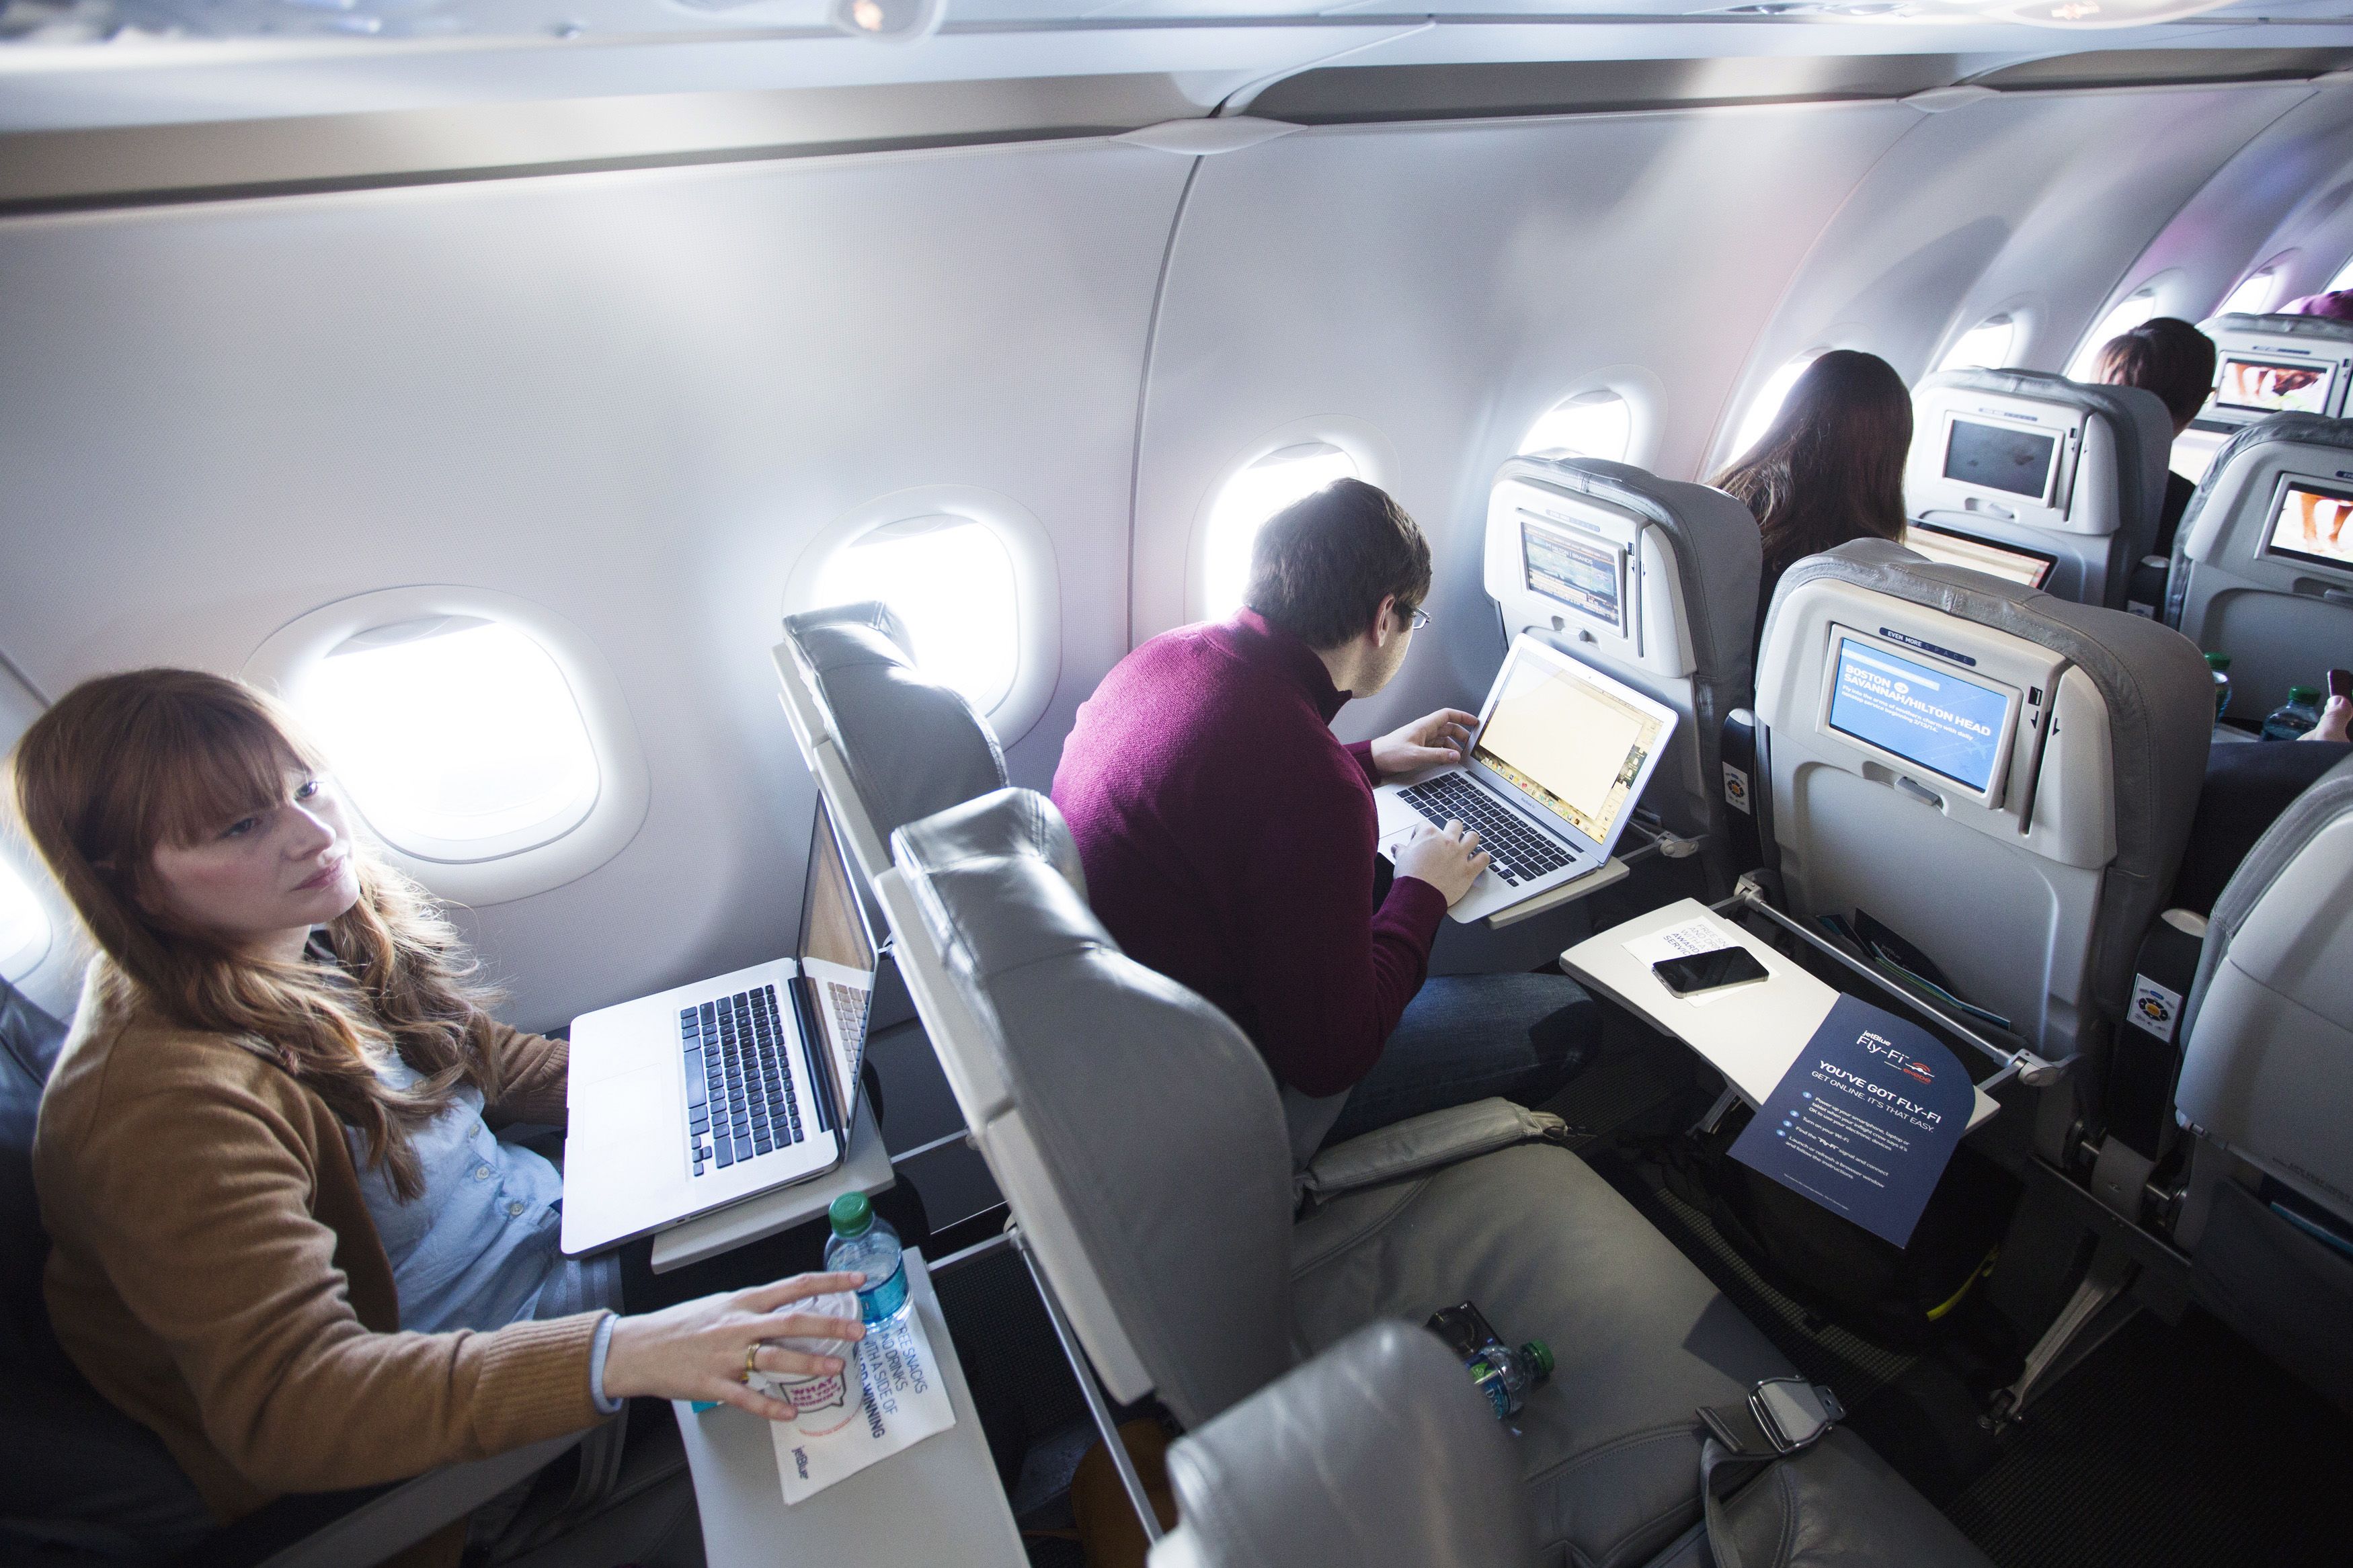 Delta's test of free in-flight Wi-Fi may shame other airlines